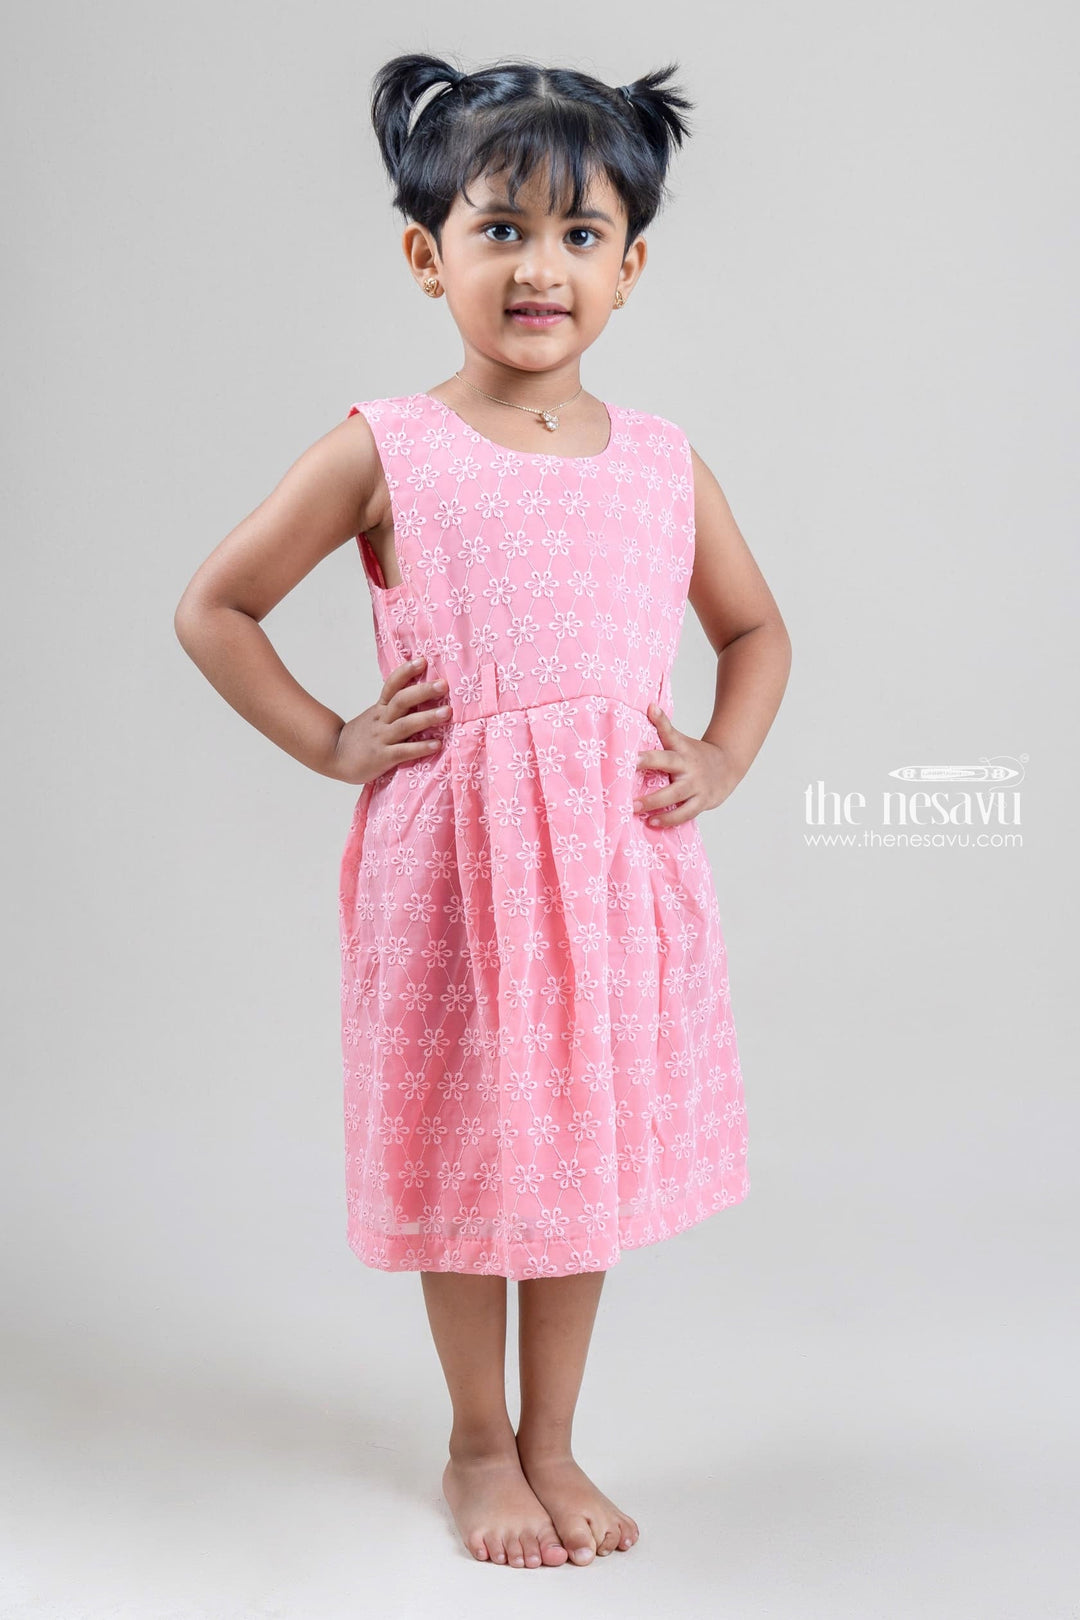 The Nesavu Baby Fancy Frock Cute Floral Embroidered Pink Baby Cotton Frock With Hand Crafted Belt Nesavu 14 (6M) / Salmon / Georgette BFJ397A-14 Floral Design Frock For Girl KIds | Baby Cotton Dresses | The Nesavu